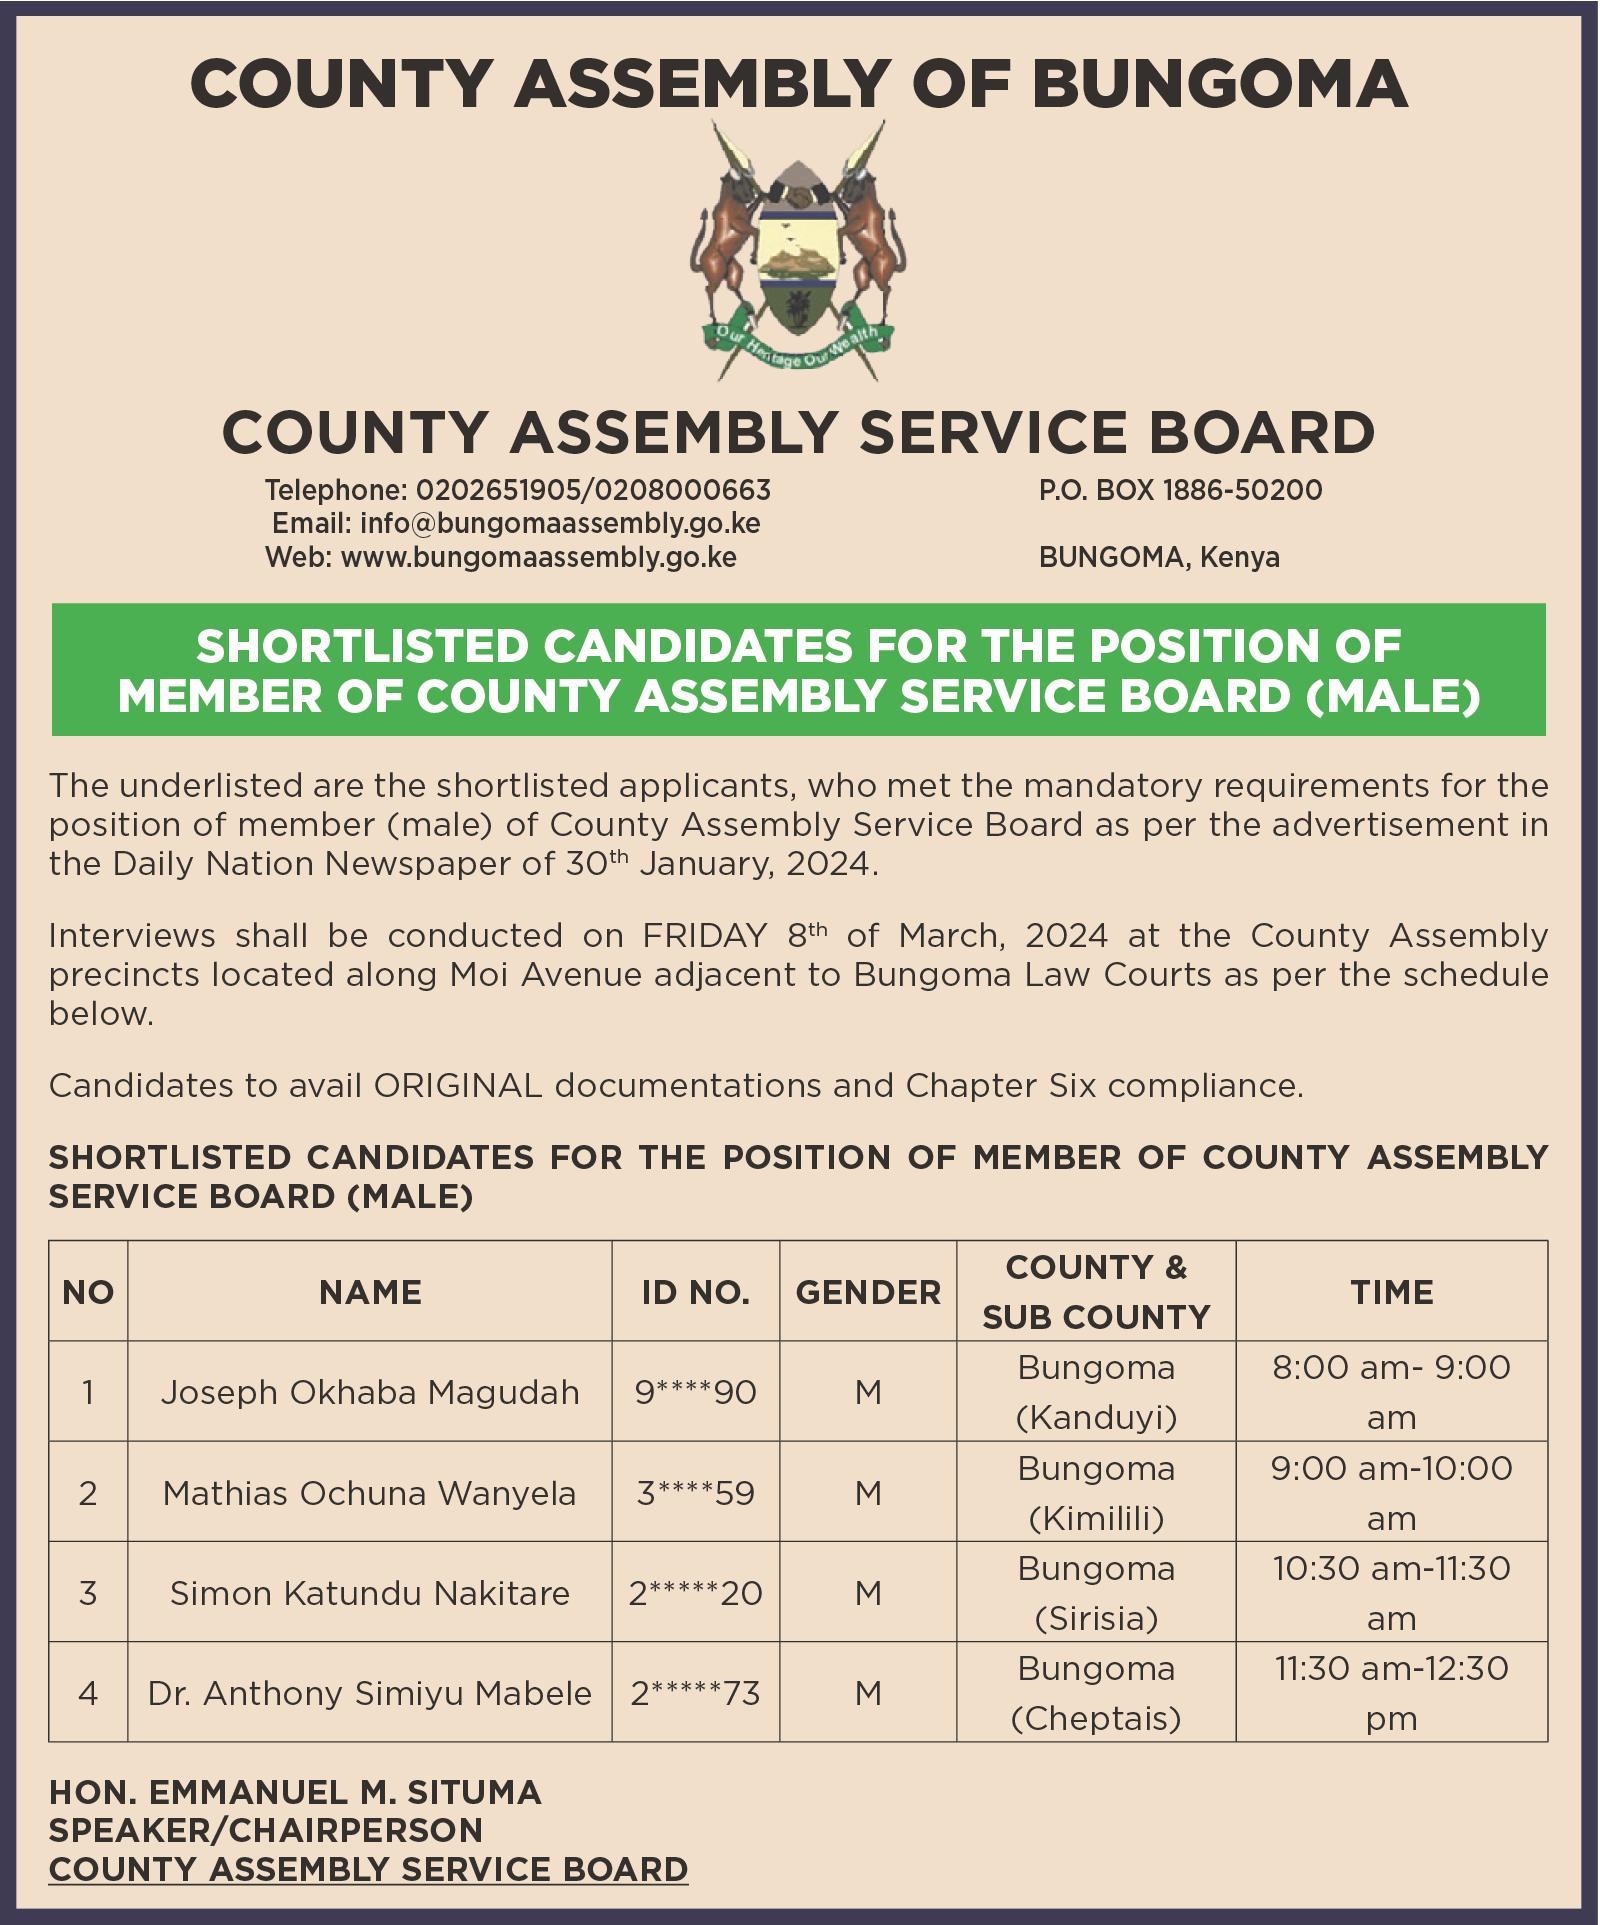 SHORTLISTED CANDIDATES FOR THE POSITION OF MEMBER OF COUNTY ASSEMBLY SERVICE BOARD (MALE)